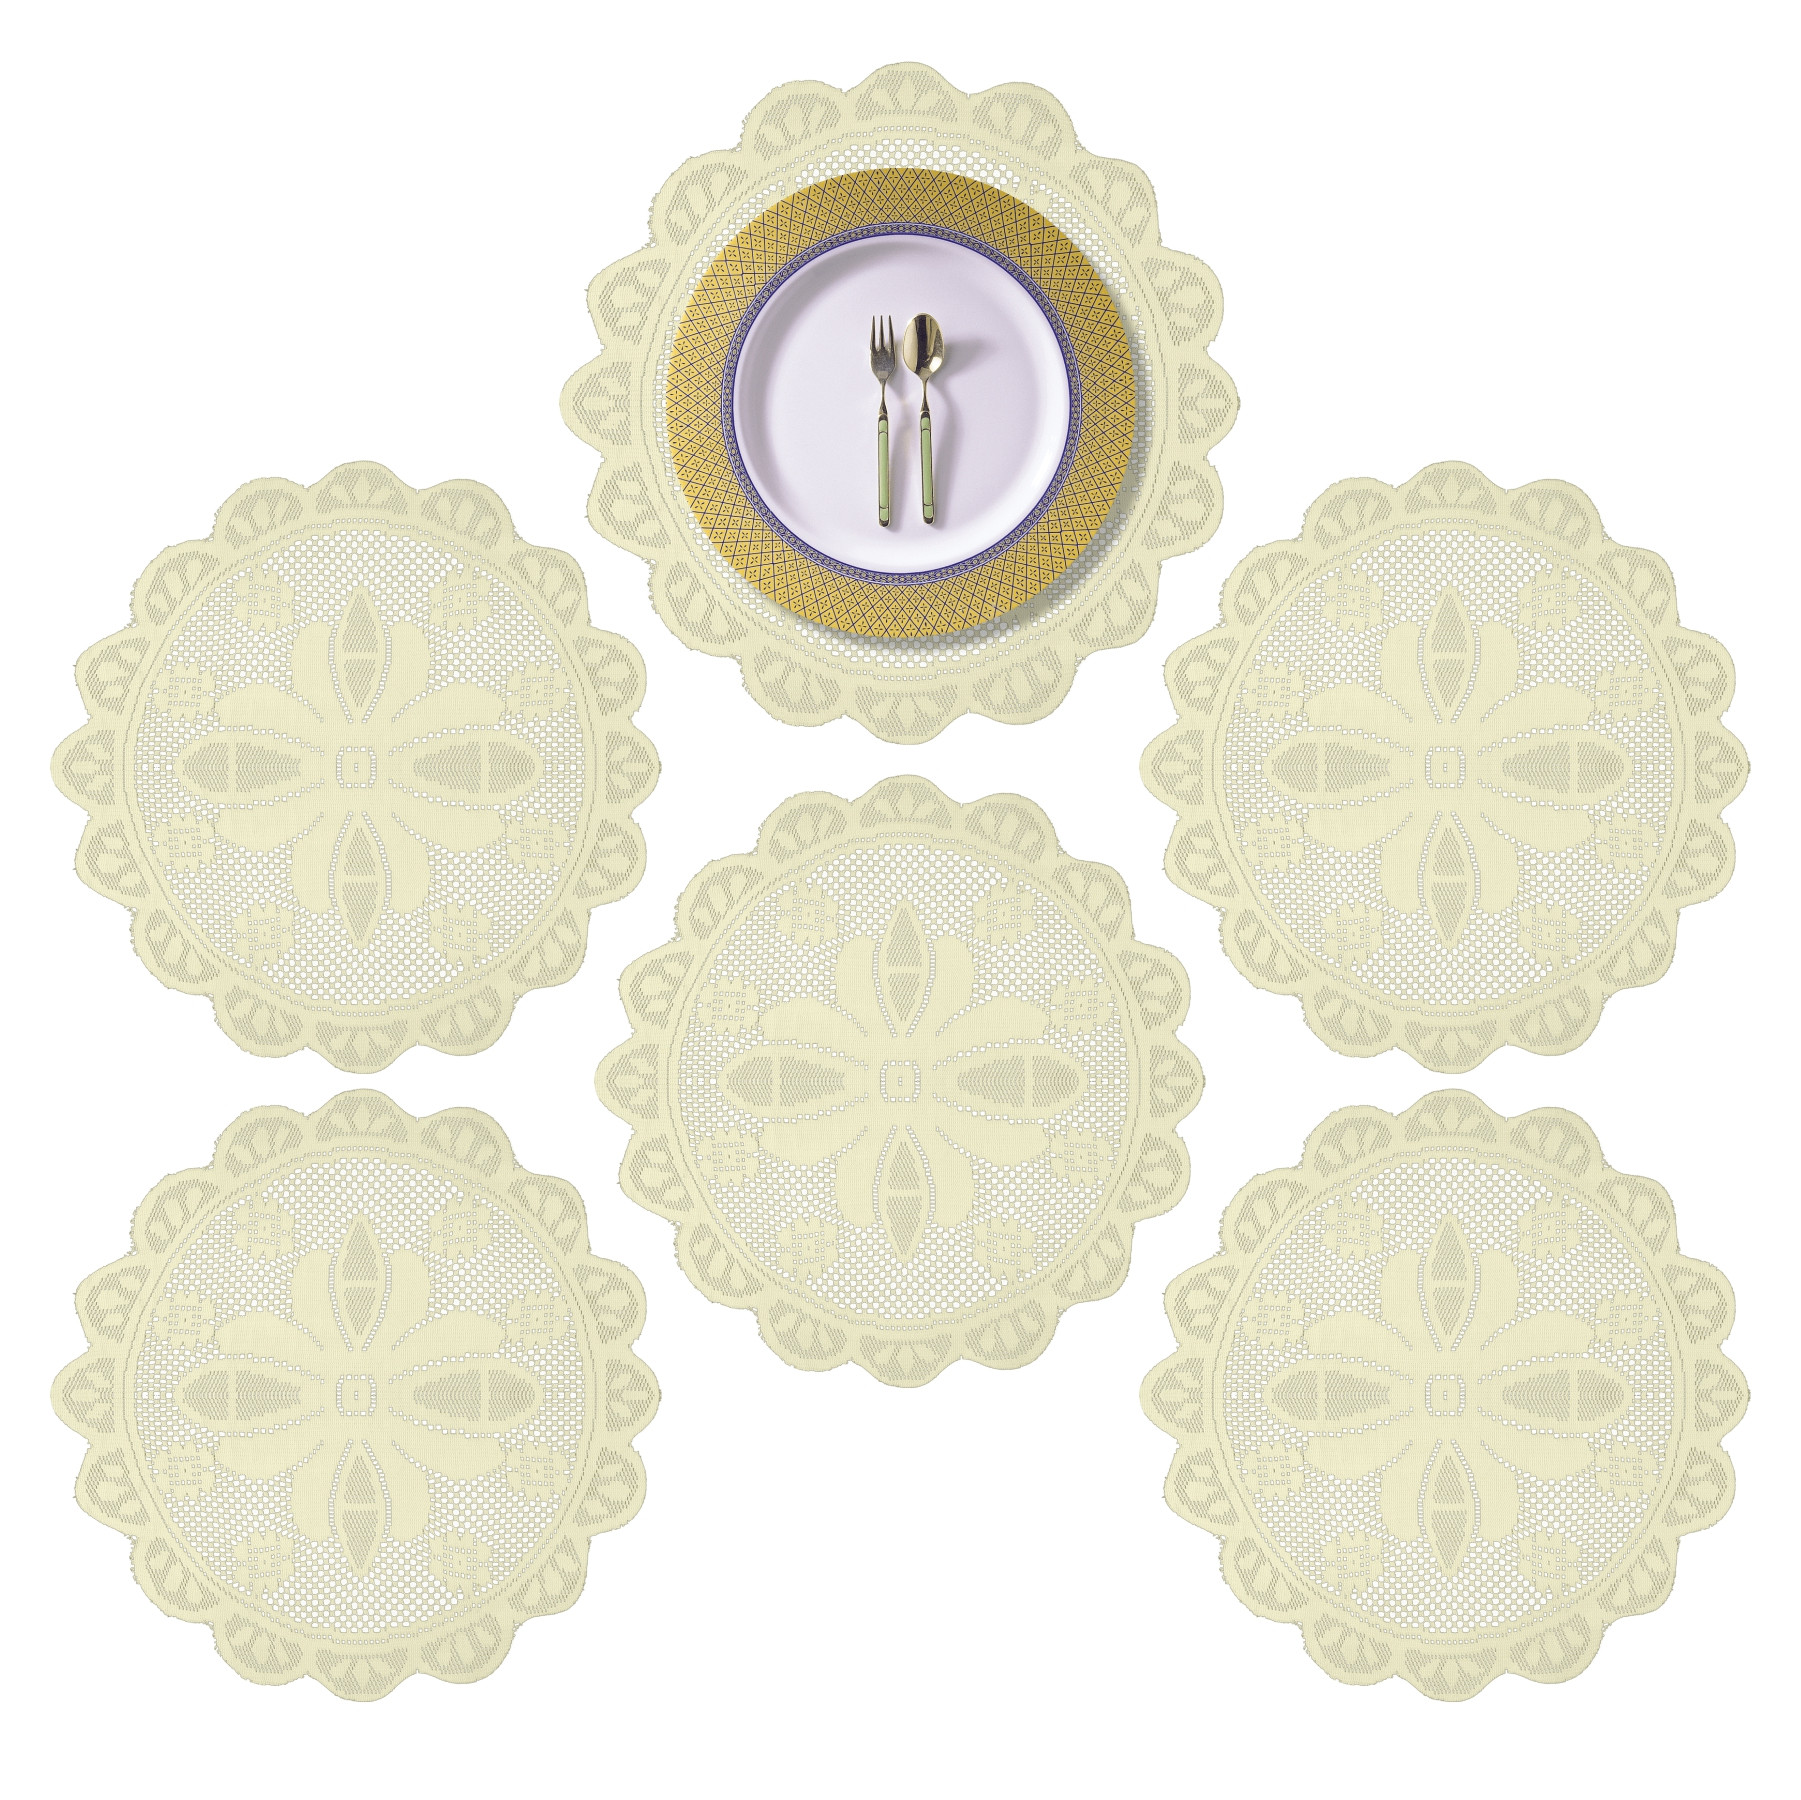 Kuber Industries Placemat | Dining Table Placemat | Center Table Mats | Round Plain Net Placemat Set | Side Table Placemats for Hotel-Home Décor | 20 Inch |Cream